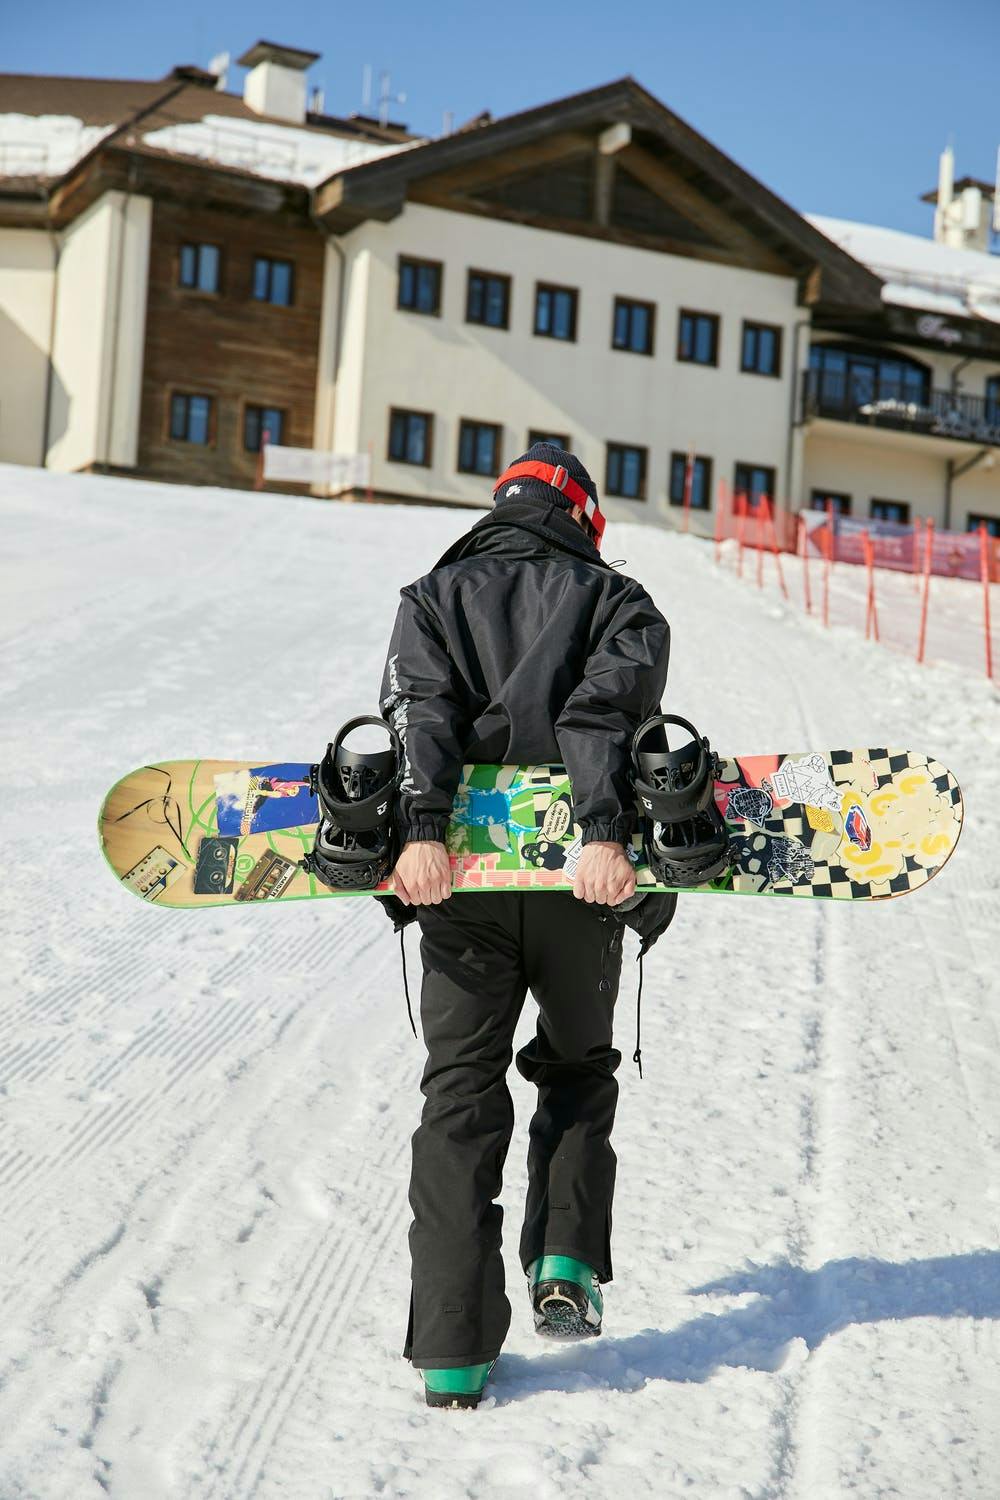 Man walks up a snowy hill towards the lodge. He is carrying a snowboard behind him and also looks to be stretching a bit. 